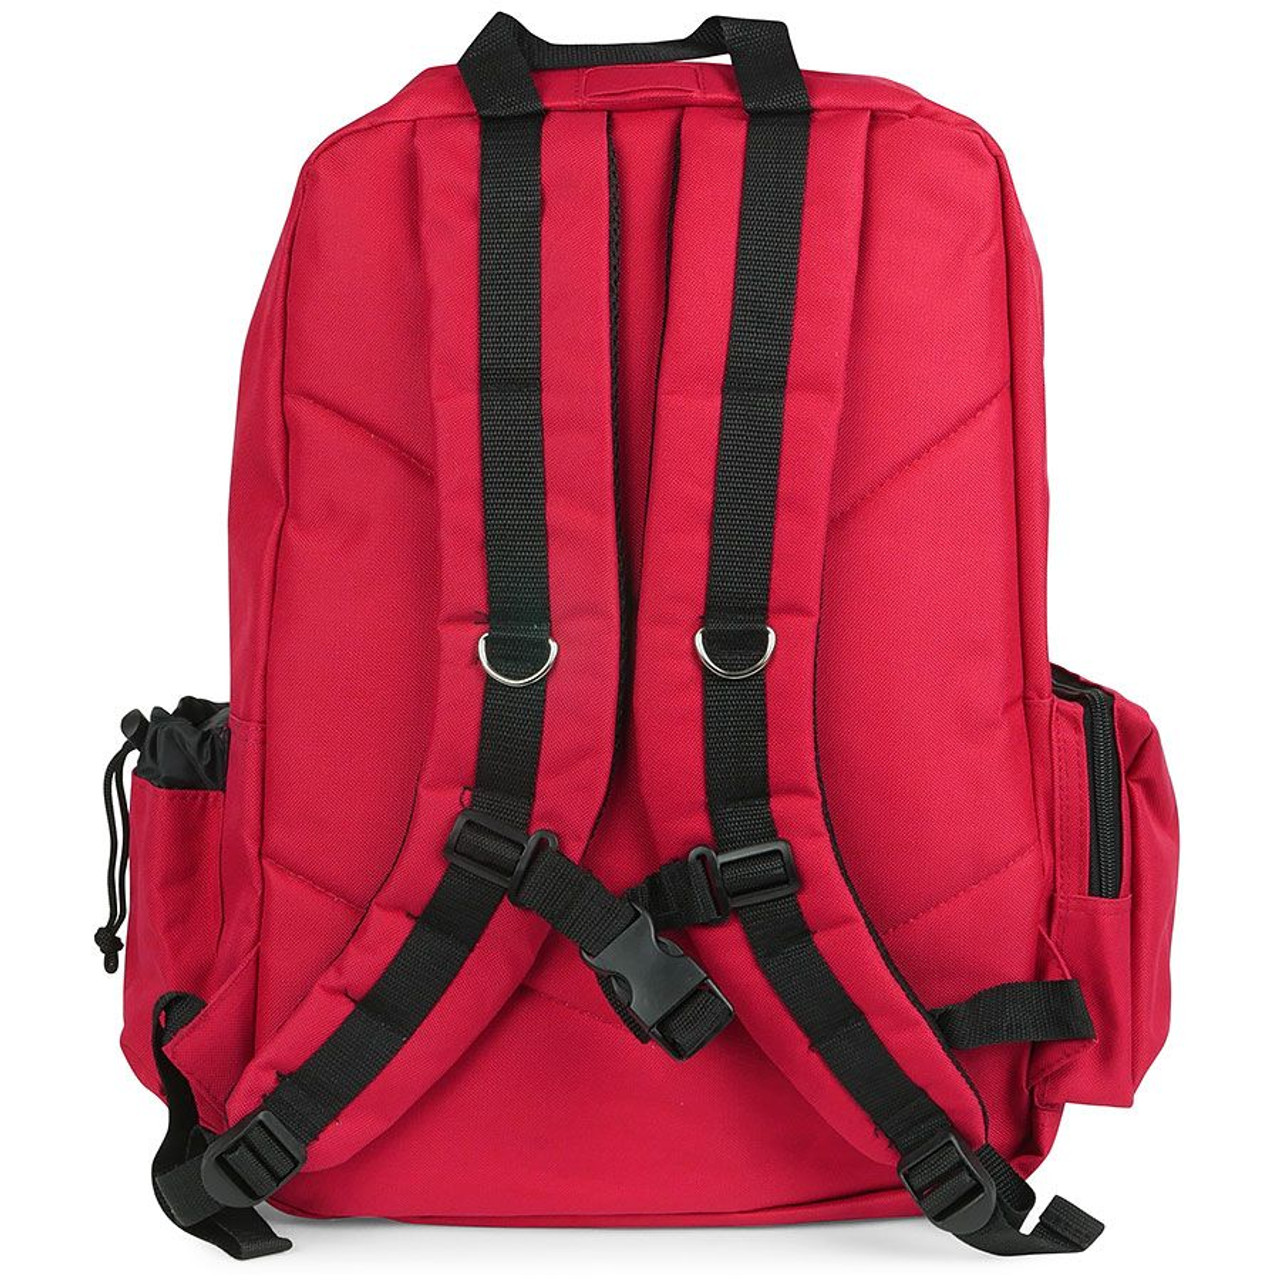 Deluxe Reponder Red - Response Backpack Survival and Aid - First EMT Medical Containers Emergency - Gear - Bags, Nylon Bag Backpacks Kit